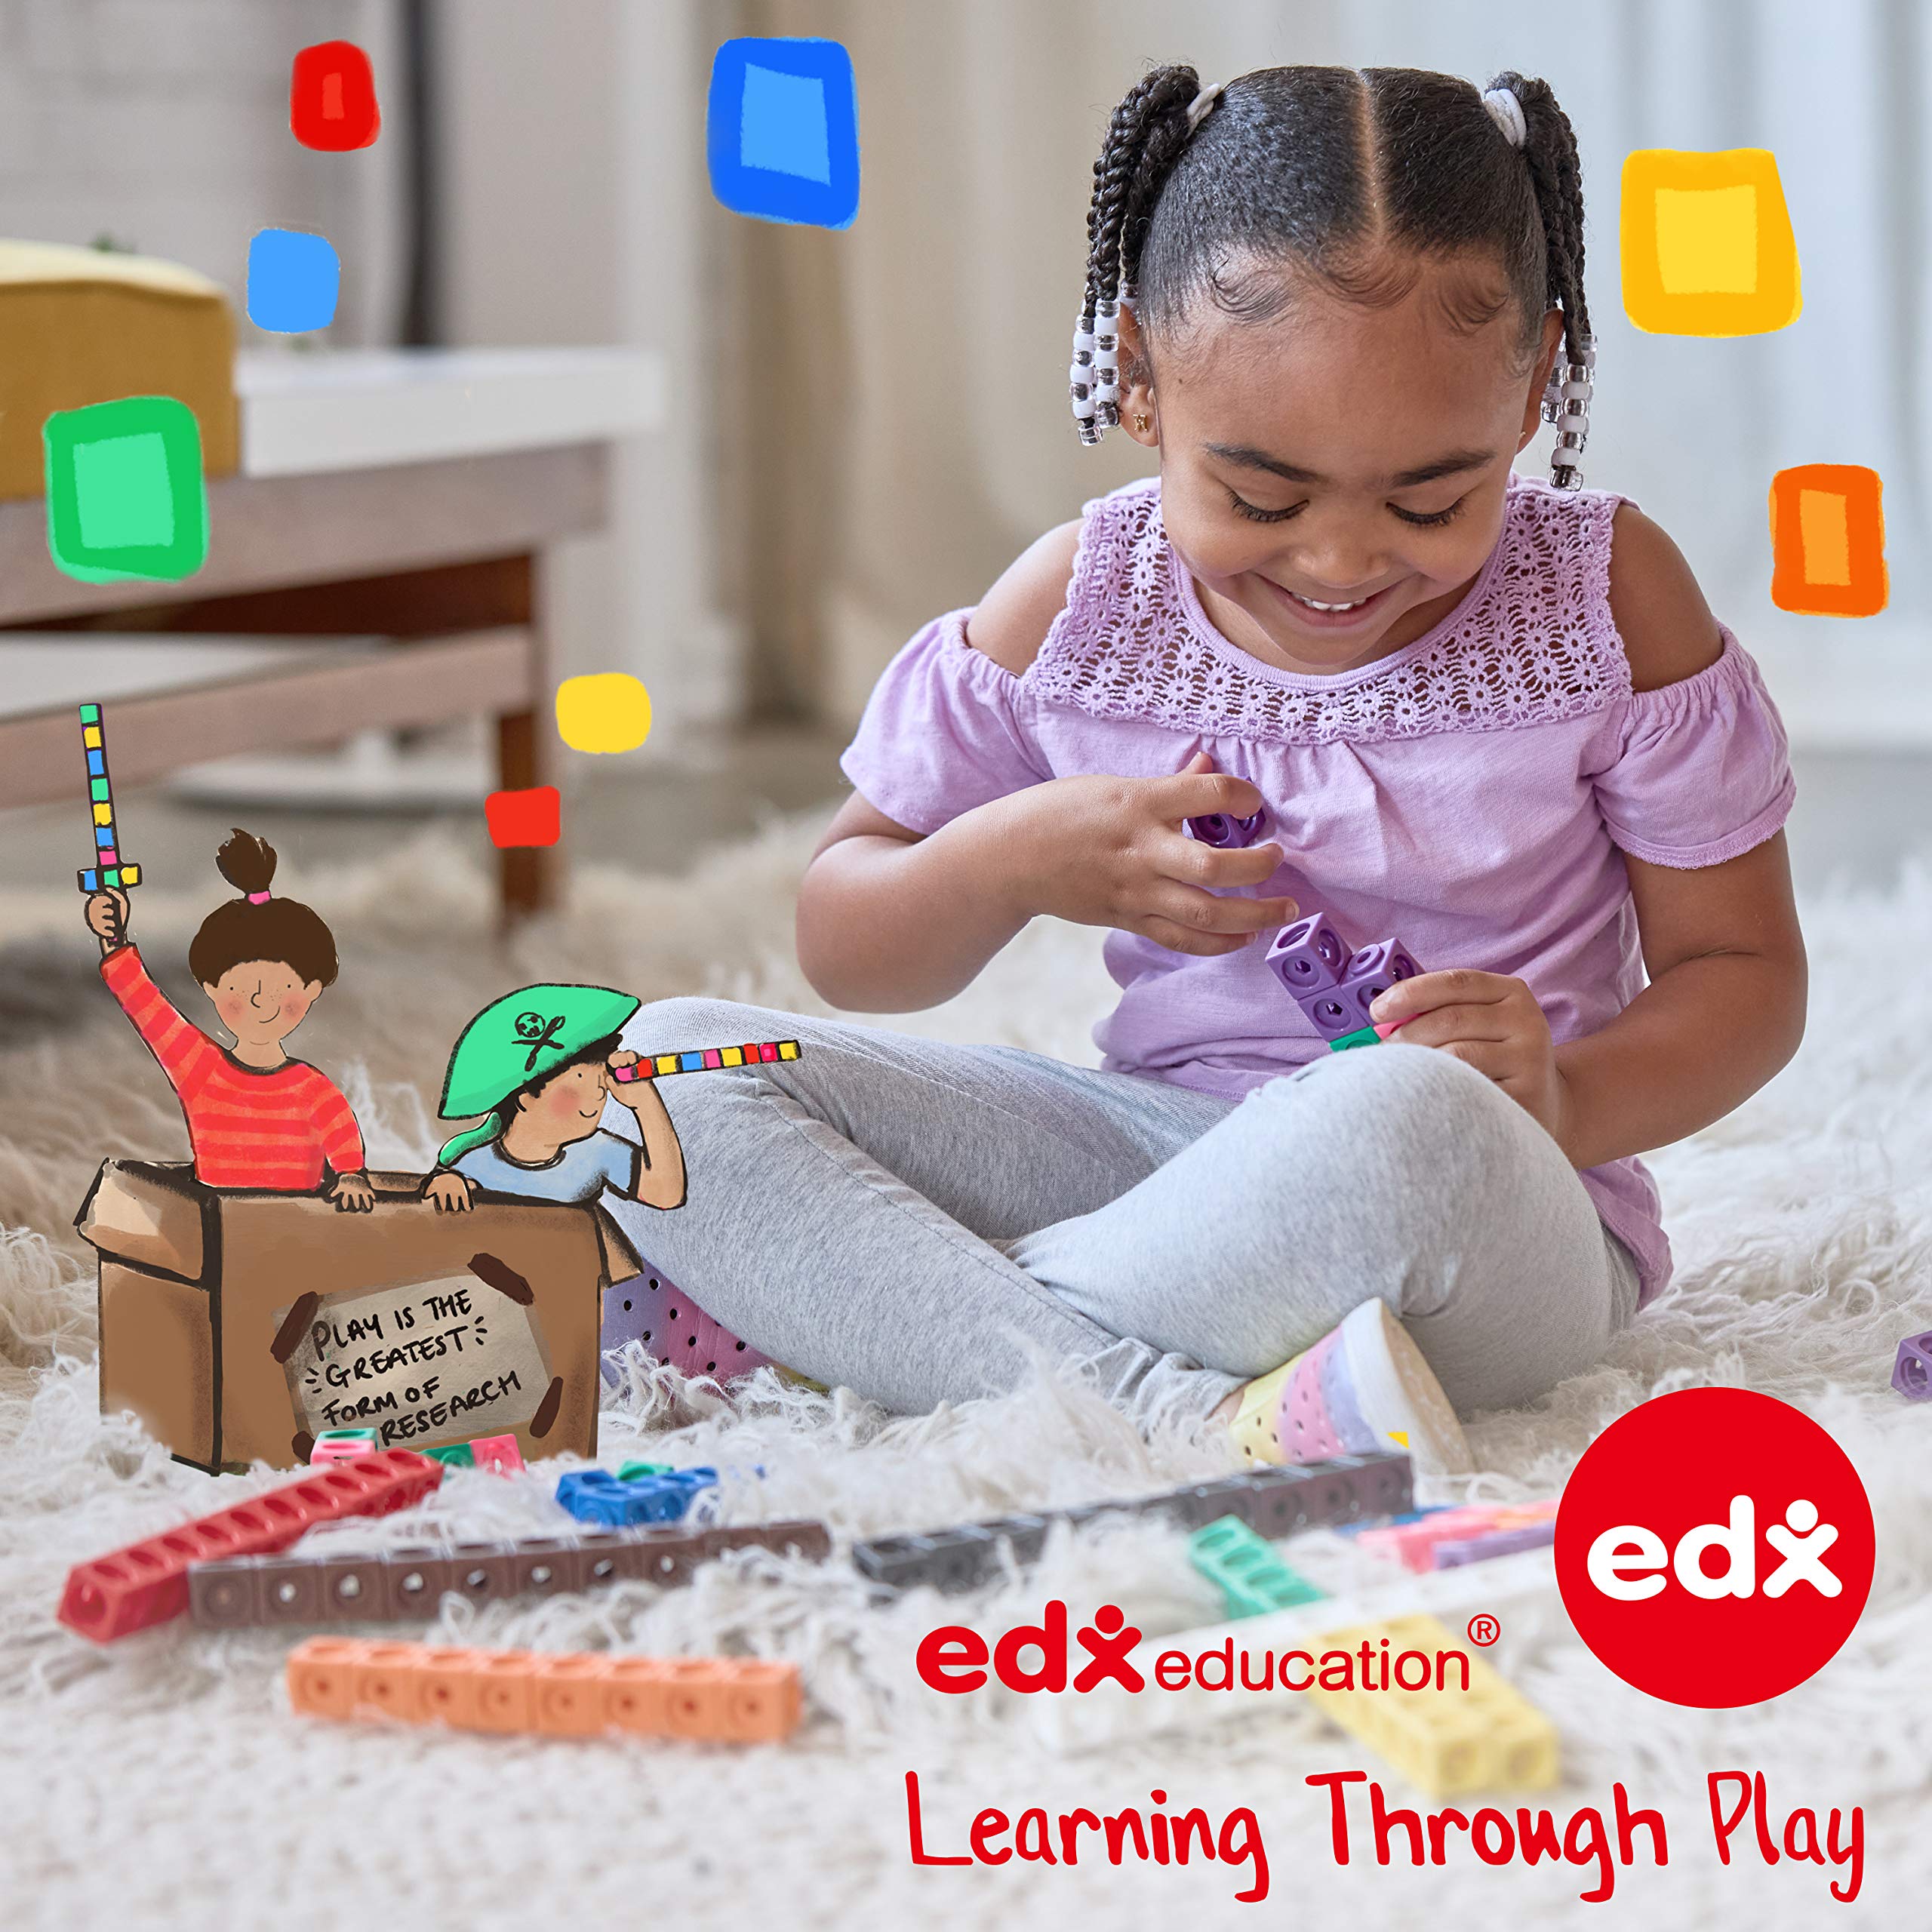 edxeducation Fun Blocks Activity Set - Building Toys for Kids - 83 Pieces - 19 Shapes - Kids Building Toy - 16 Activity Cards